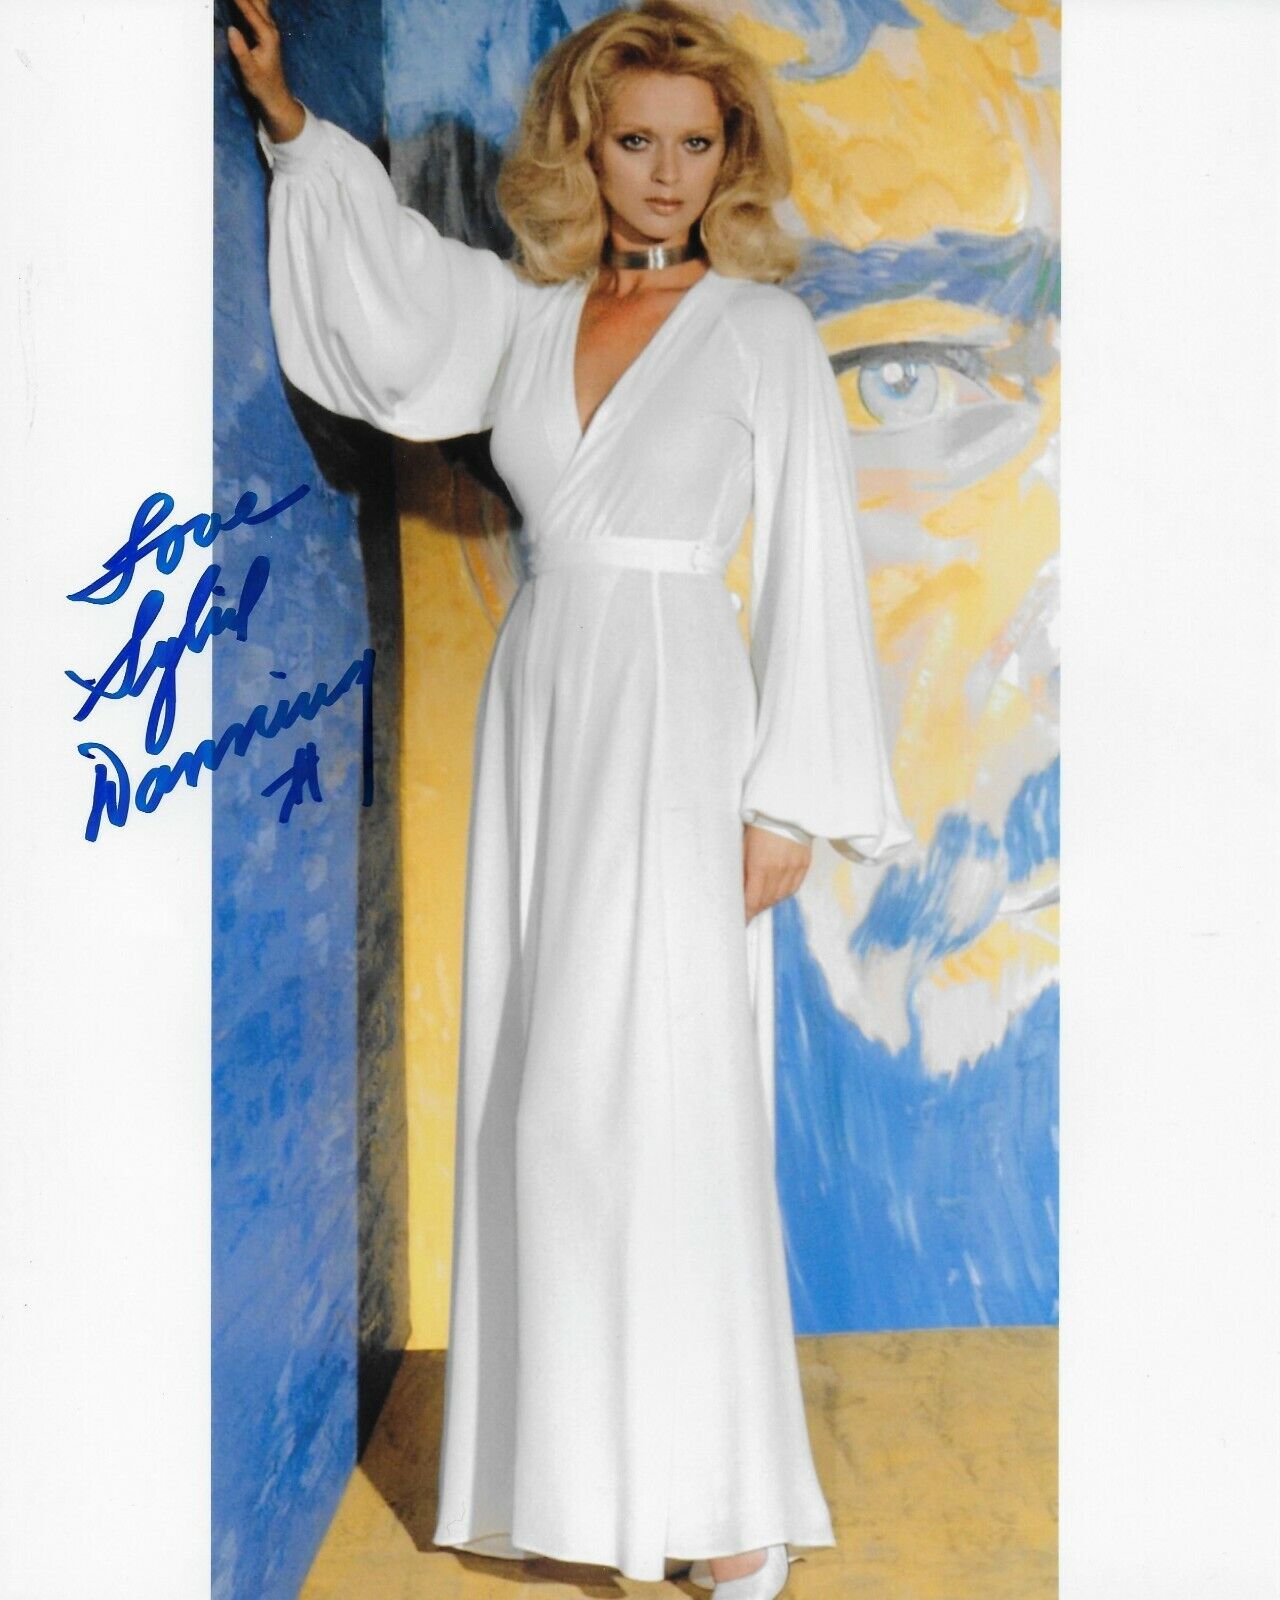 Sybil Danning Signed 8x10 Photo Poster painting - 1970's / 1980's B Movie Actress - SEXY!!! #41